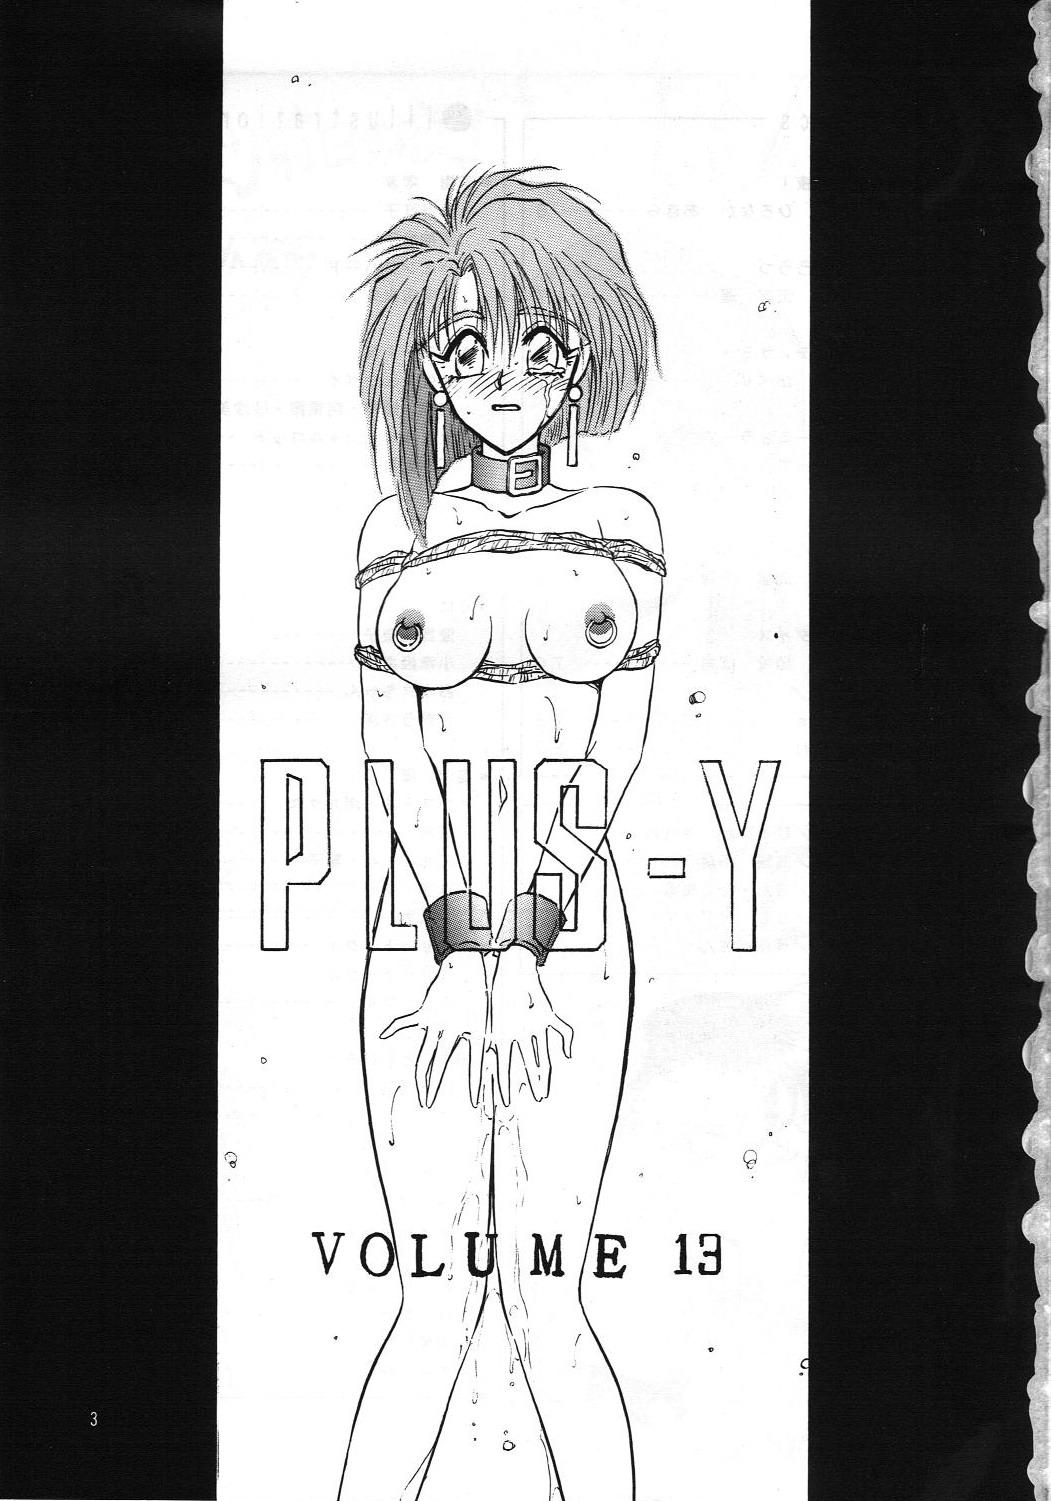 France PLUS-Y Vol.13 - Ah my goddess Tenchi muyo Ghost sweeper mikami Brave express might gaine Future gpx cyber formula Muka muka paradise Amature Allure - Page 2